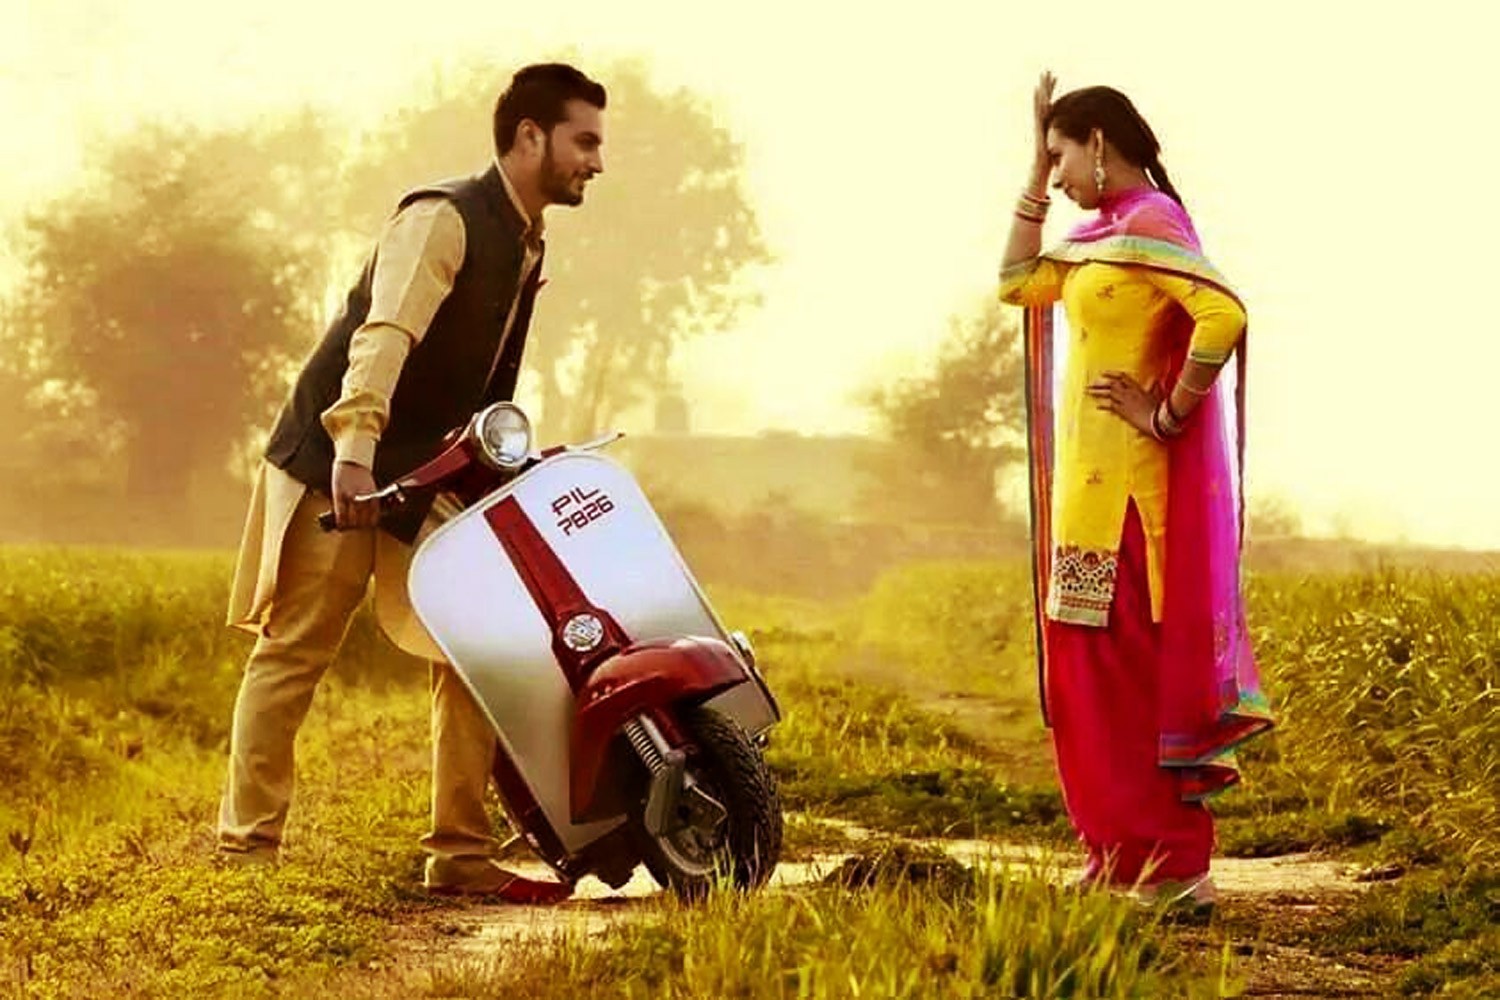 Punjabi Couple Wallpapers HD Pictures One HD Wallpaper Pictures